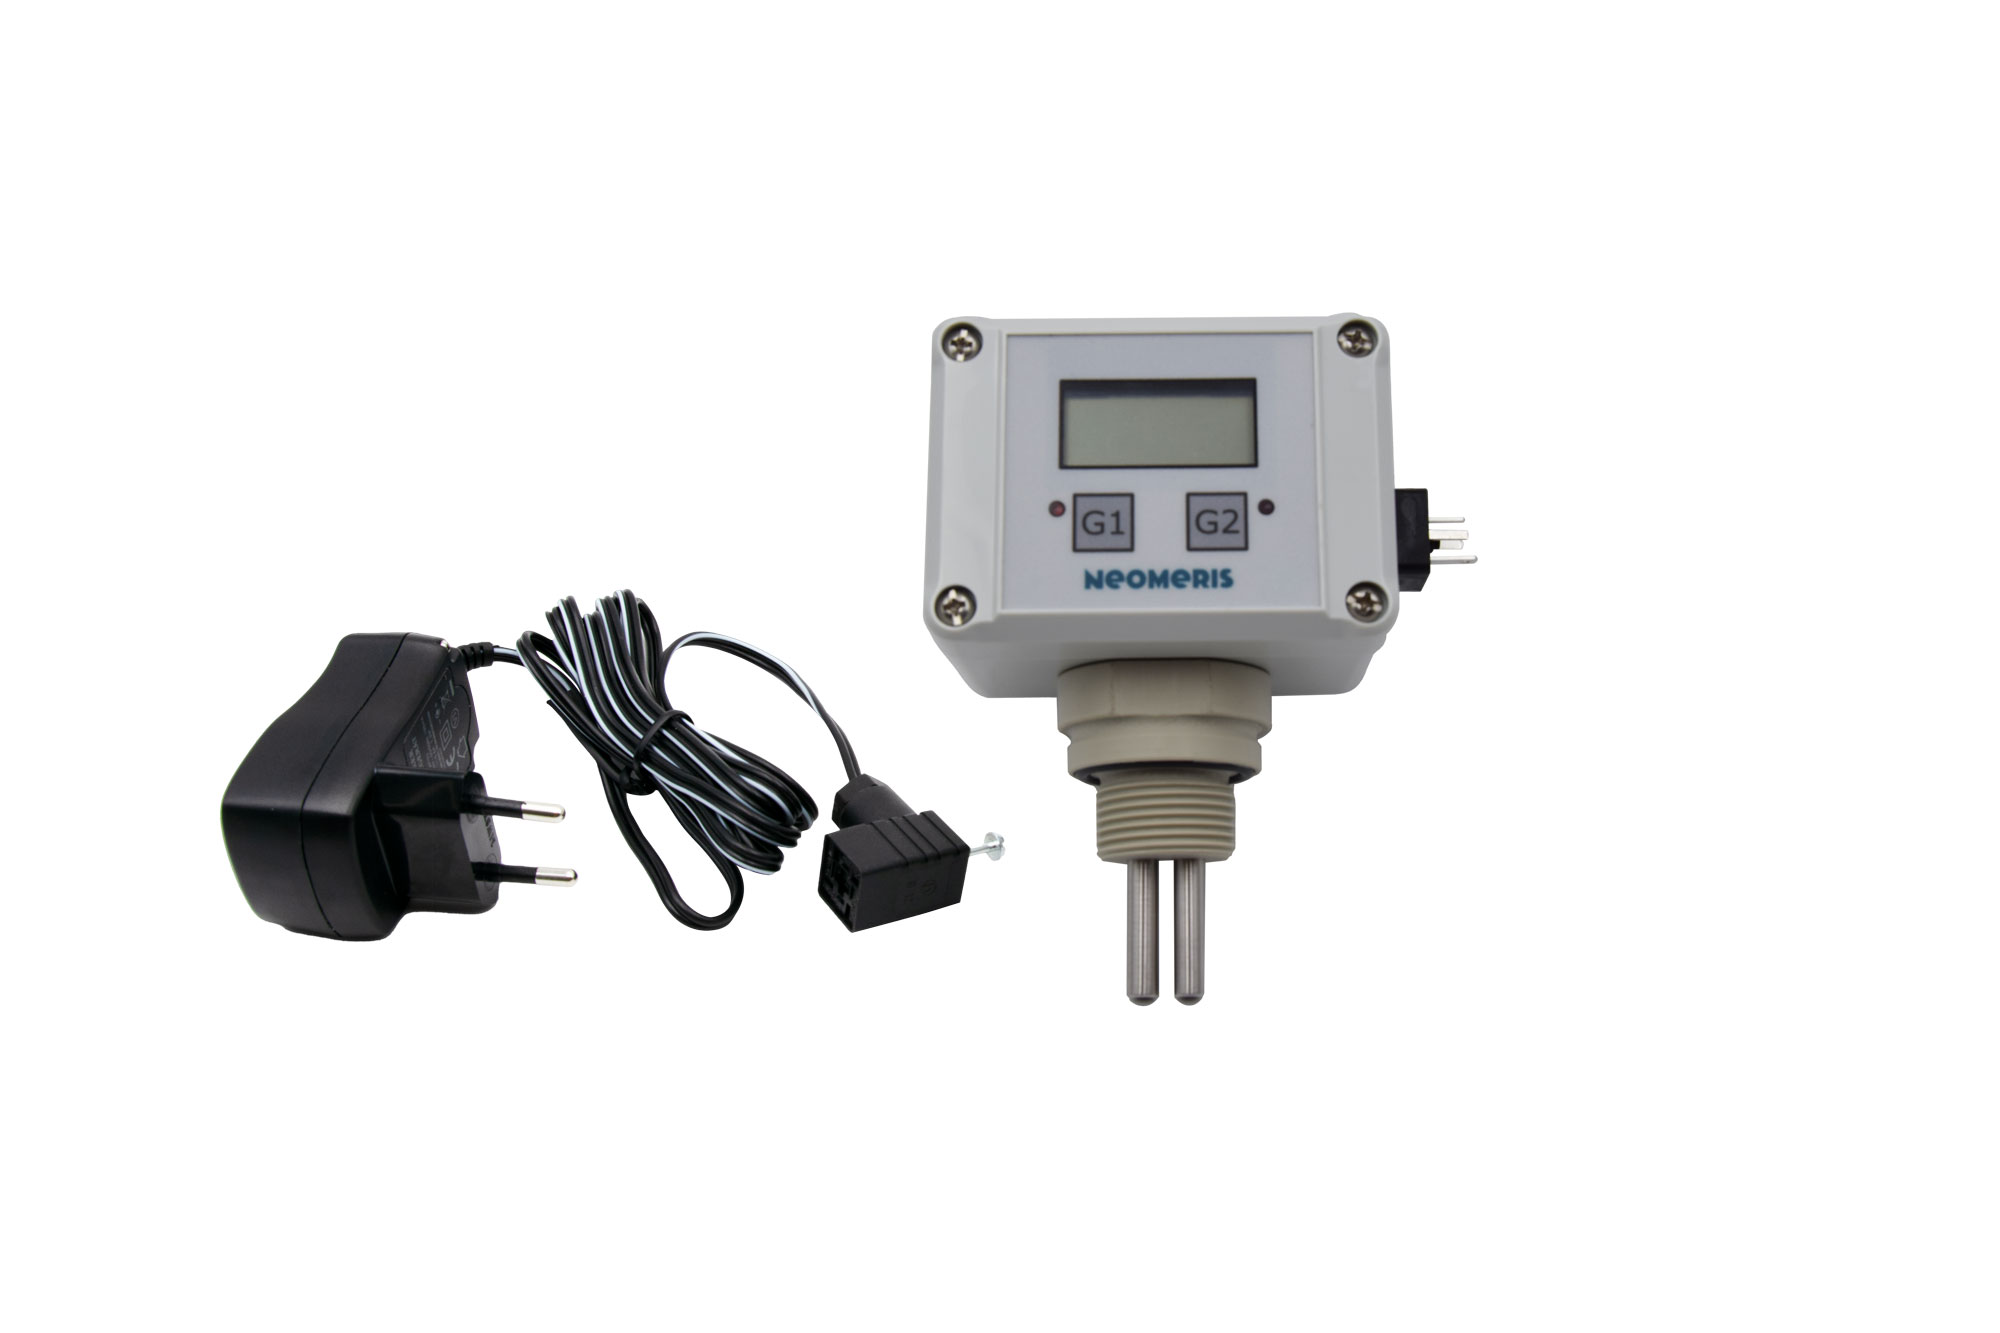 N-LF1000 conductivity meter 0-1.000 µS with integrated 3/4" screw-in measuring cell